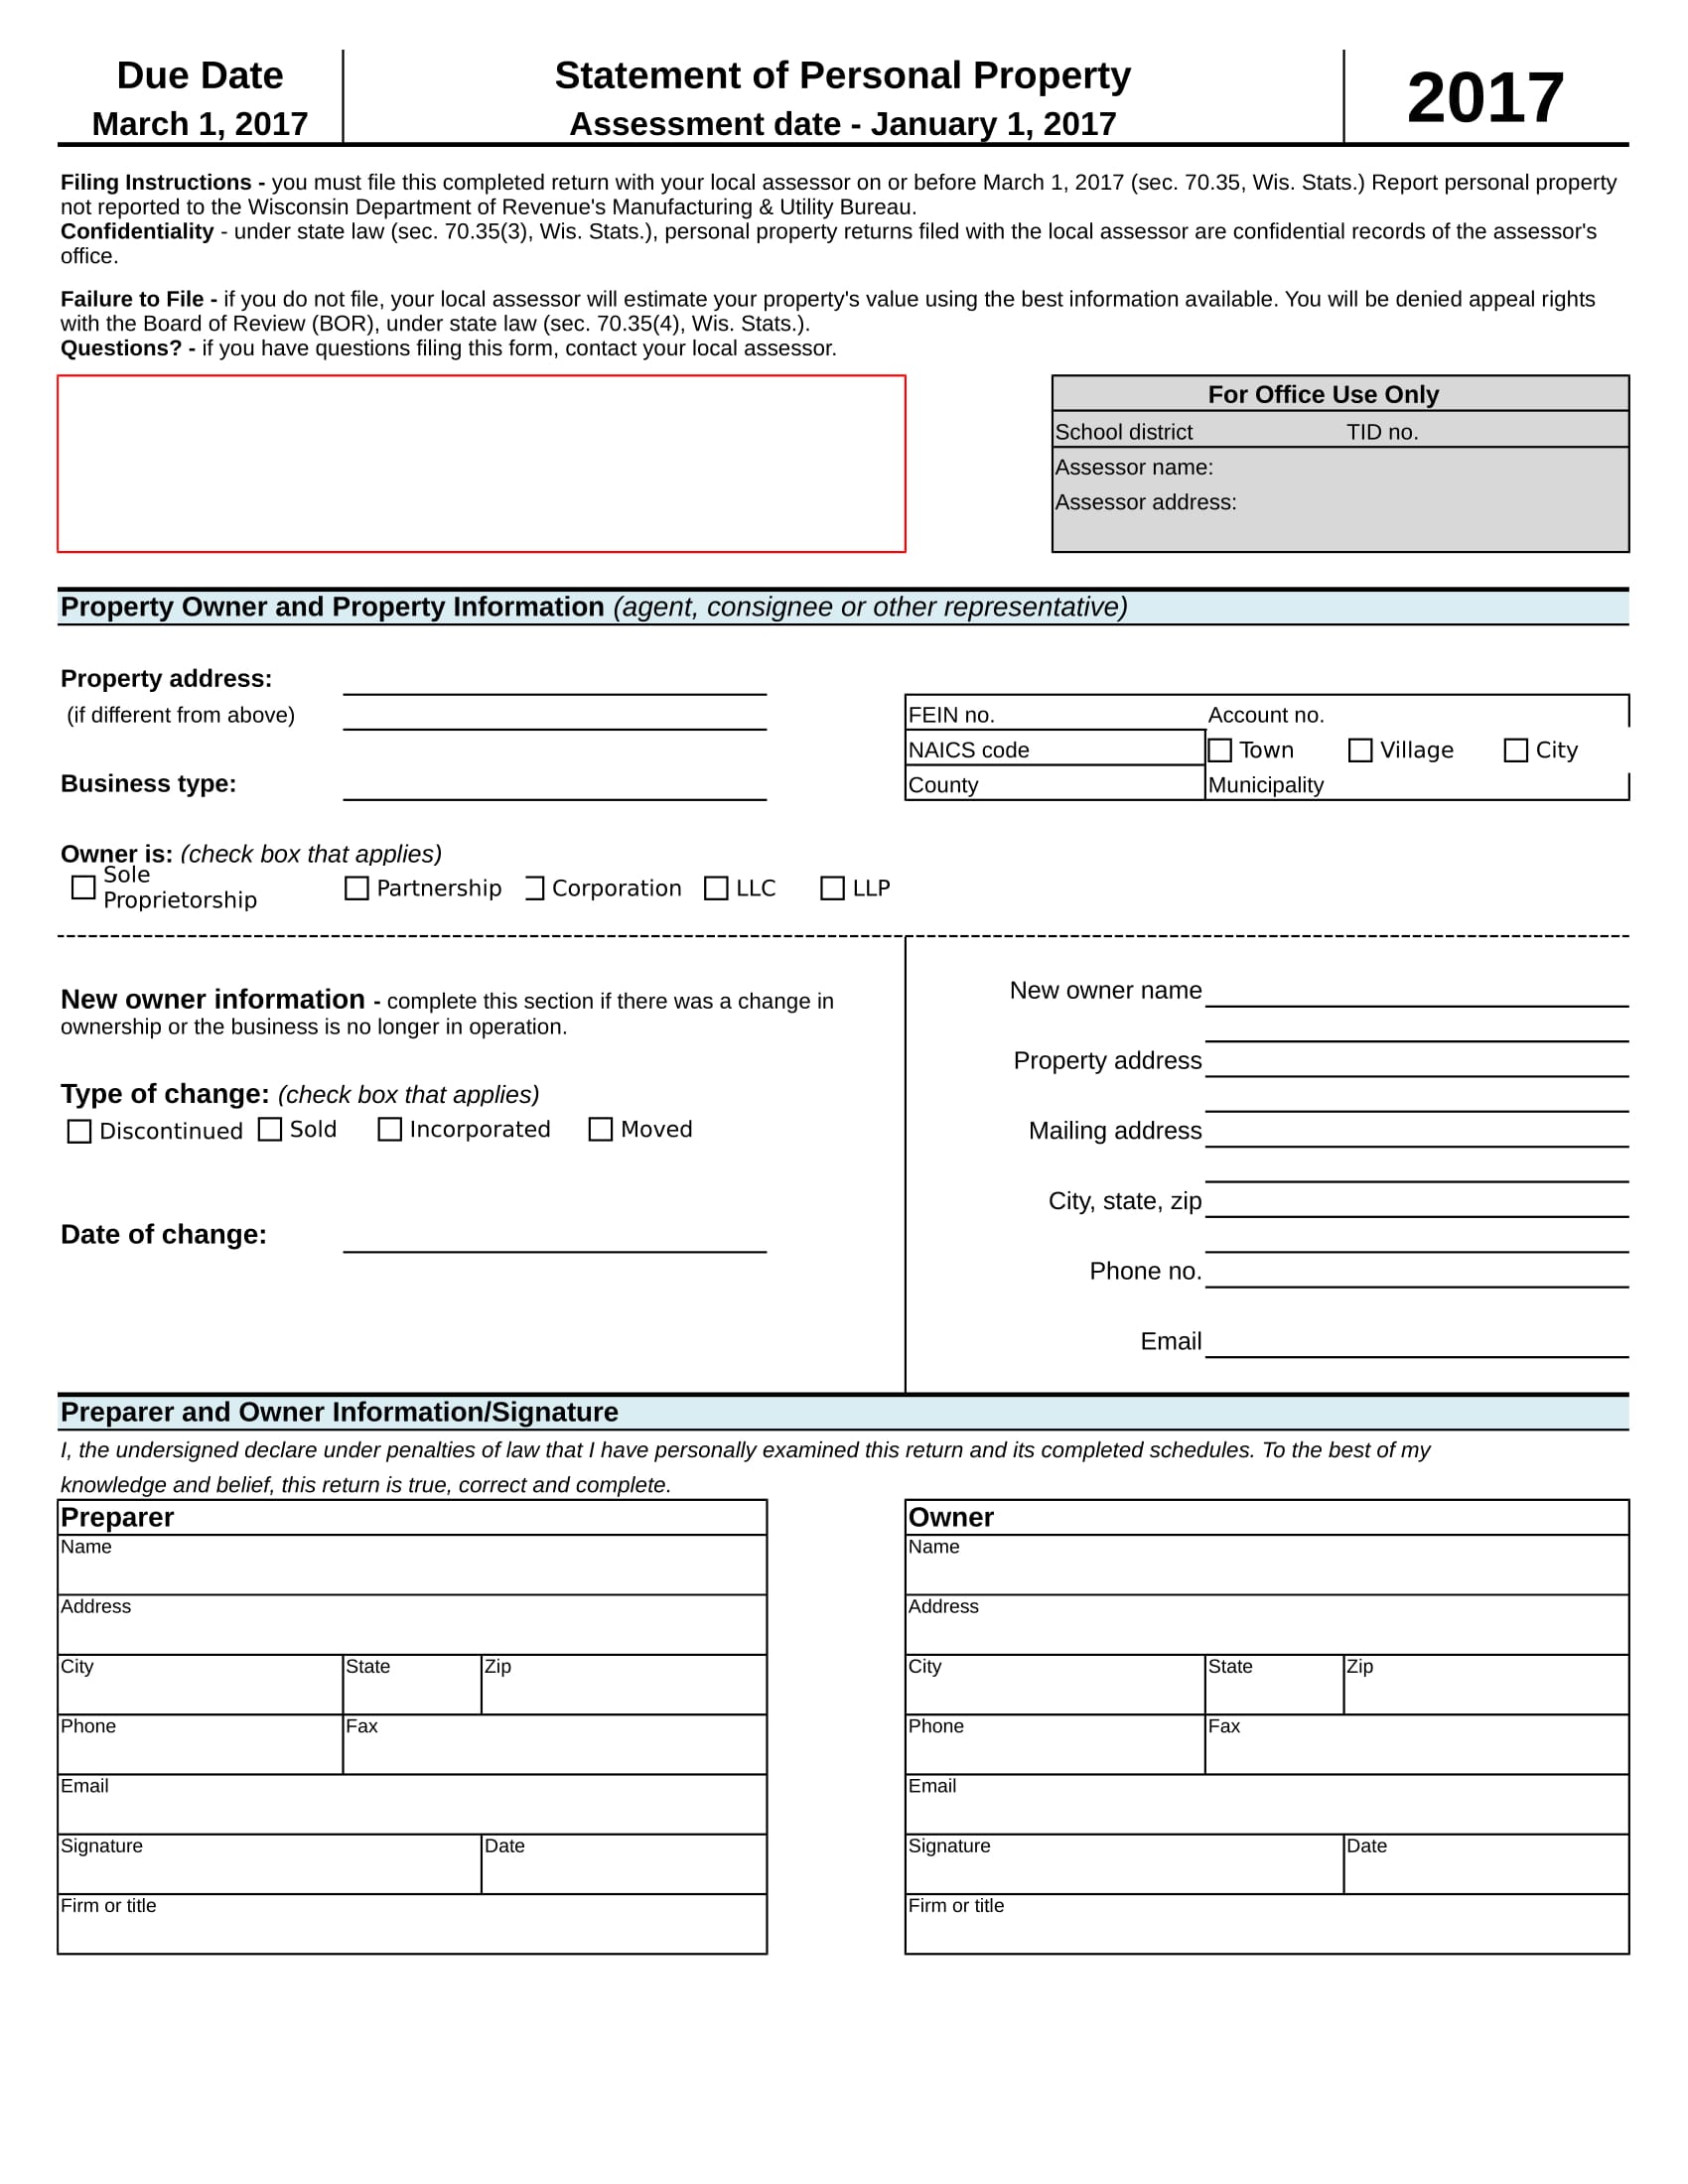 statement of personal property form 1